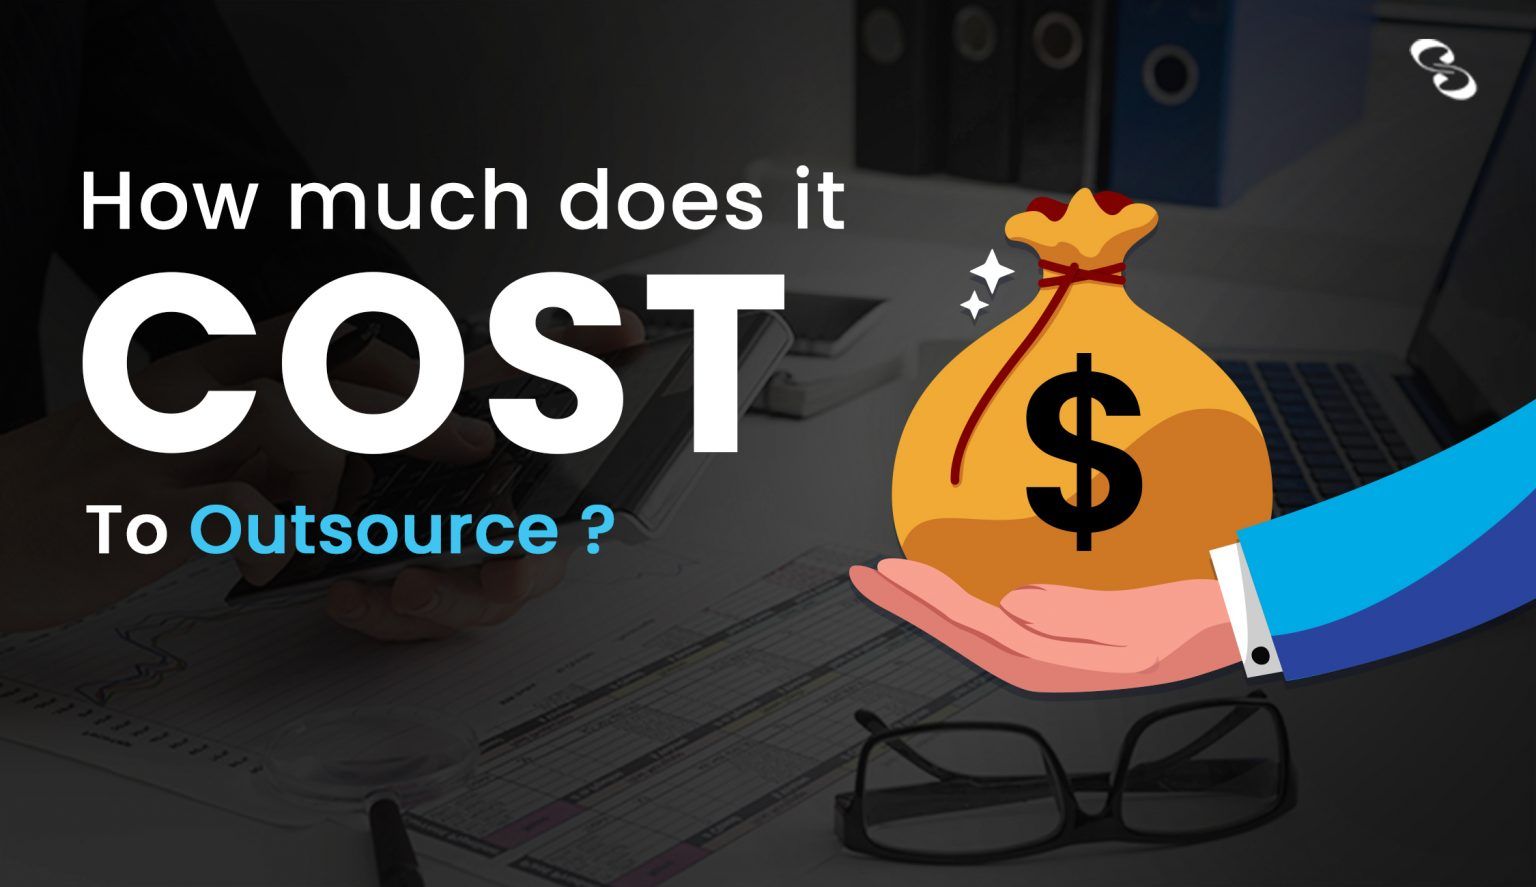 Where to Outsource, and How Much Does It Cost?